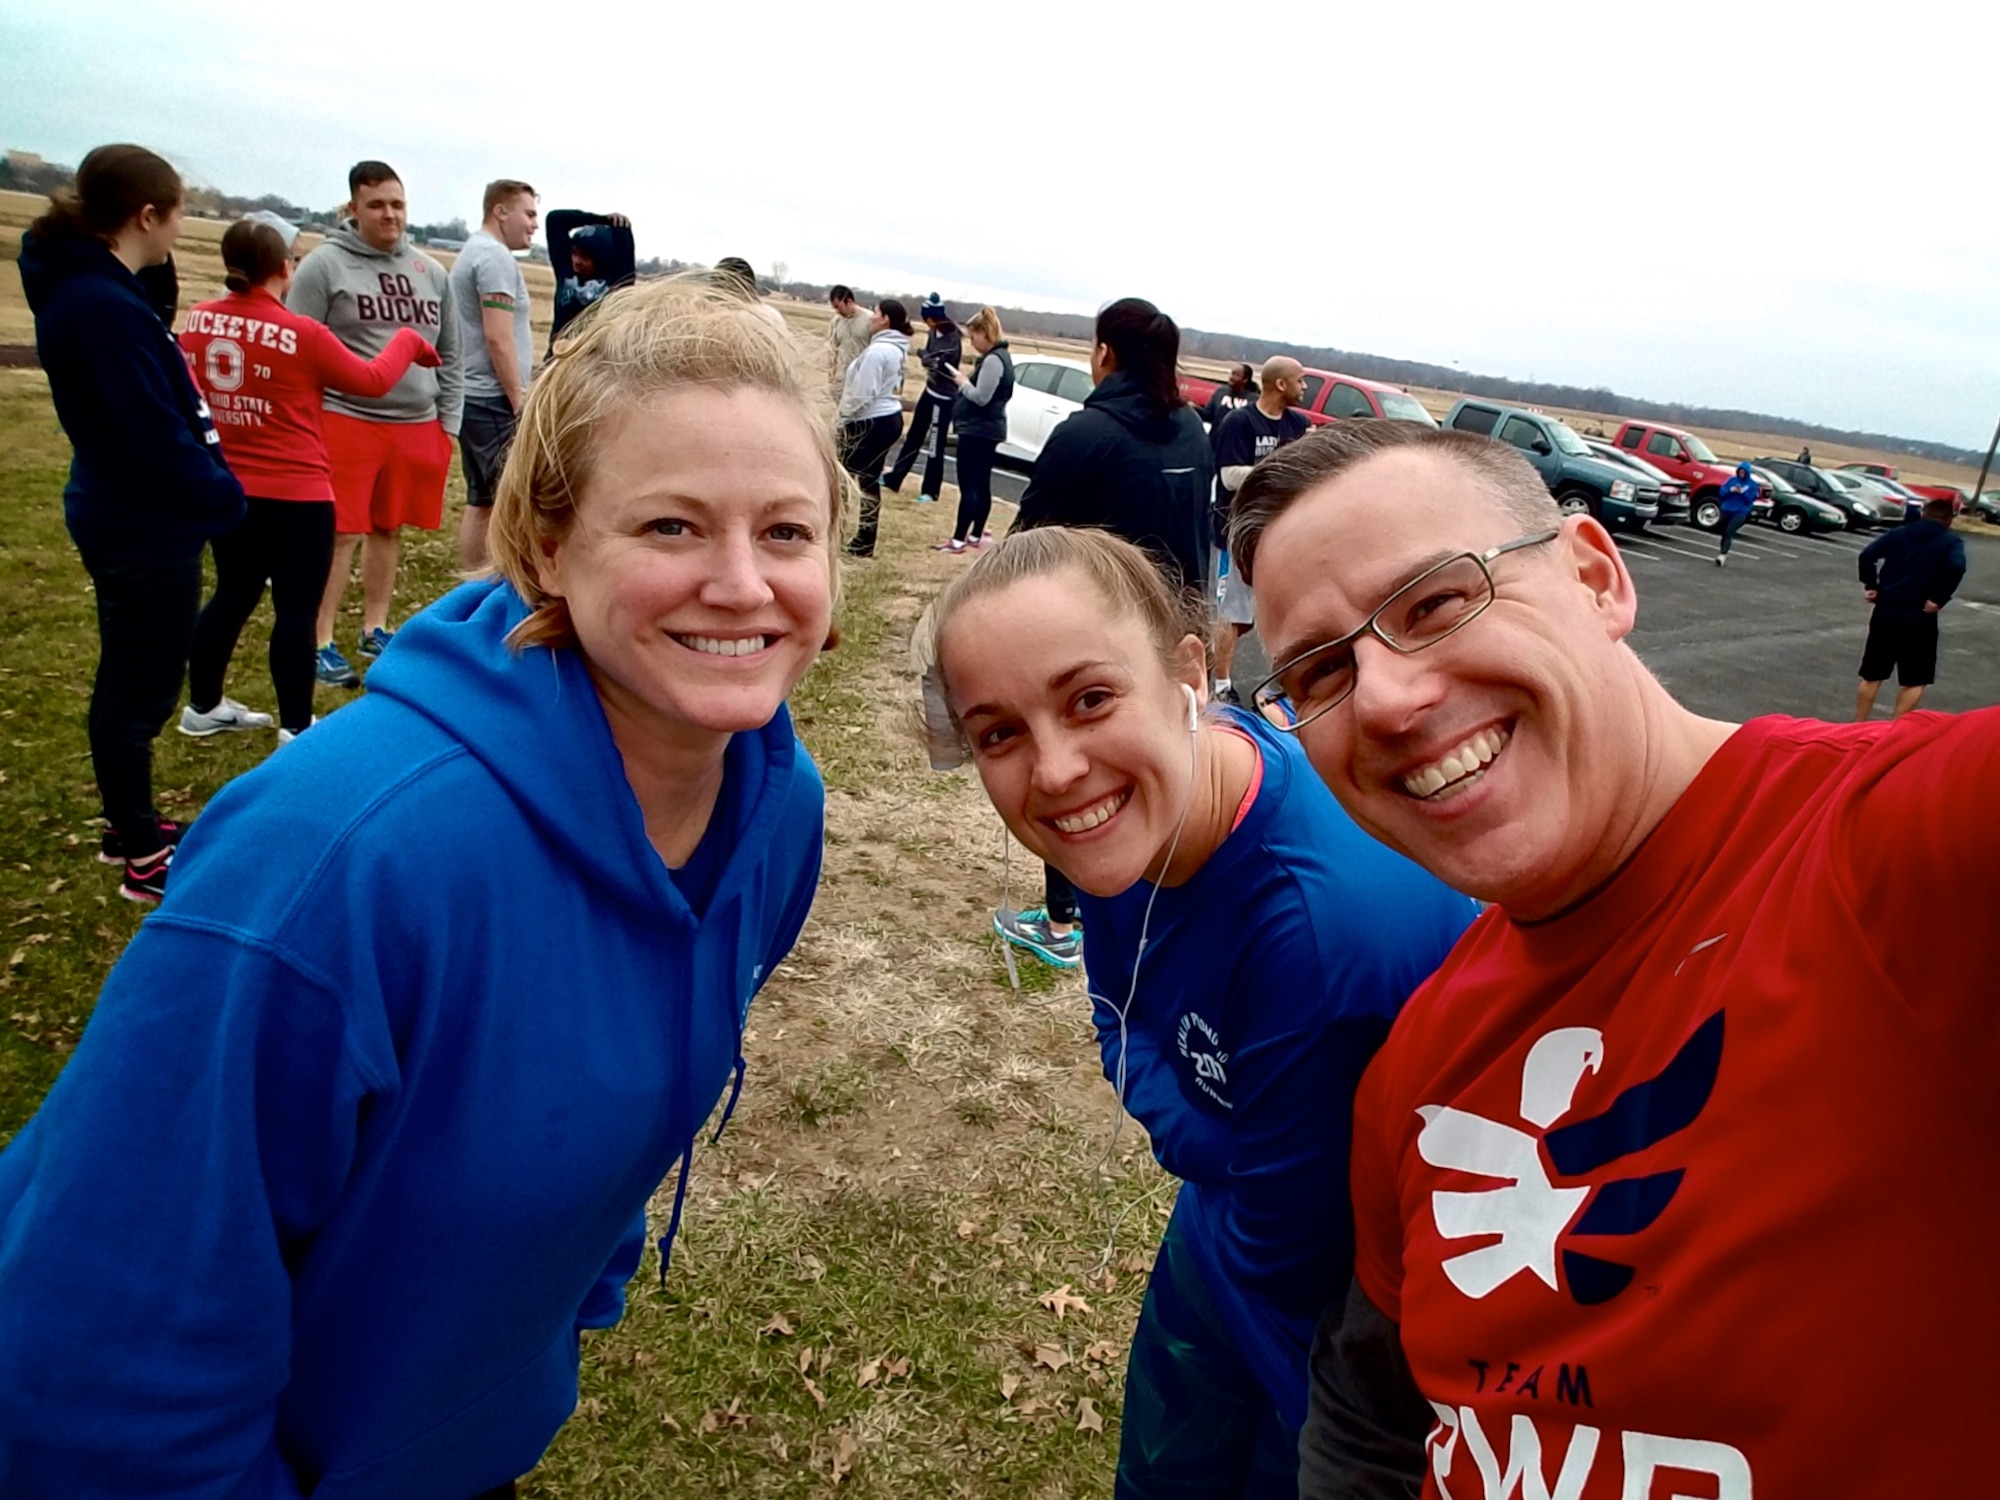 Christopher Parr, 932nd Airlift Wing Public Affairs specialist poses with Heather Braundmeier, Running, left, Clinic guru, and Jennifer Duckett group leader and Team 932nd AW member Feb. 6, 2017, Scott Air Force Base, Illinois.  Parr is documenting his experience with the running clinic in a weekly blog.  (U.S. Air Force photo by Christopher Parr)